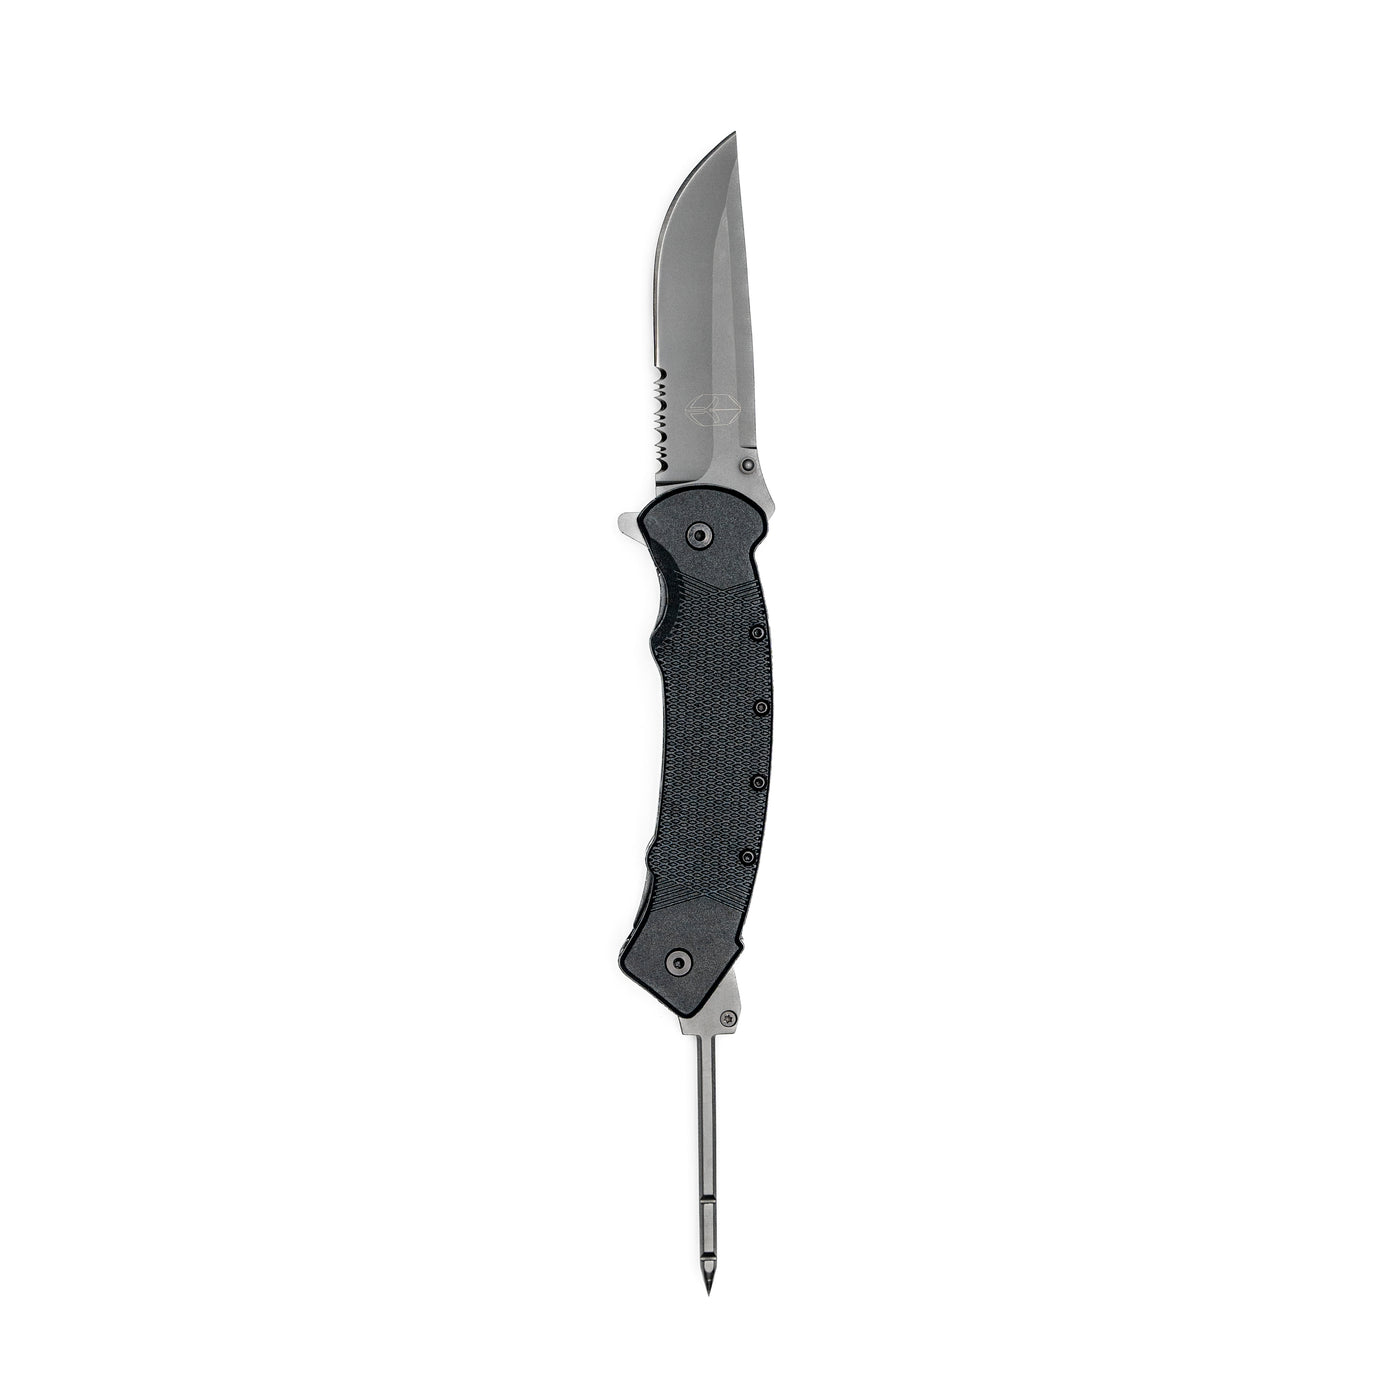 Folding Pocket Knife with Searching Probe